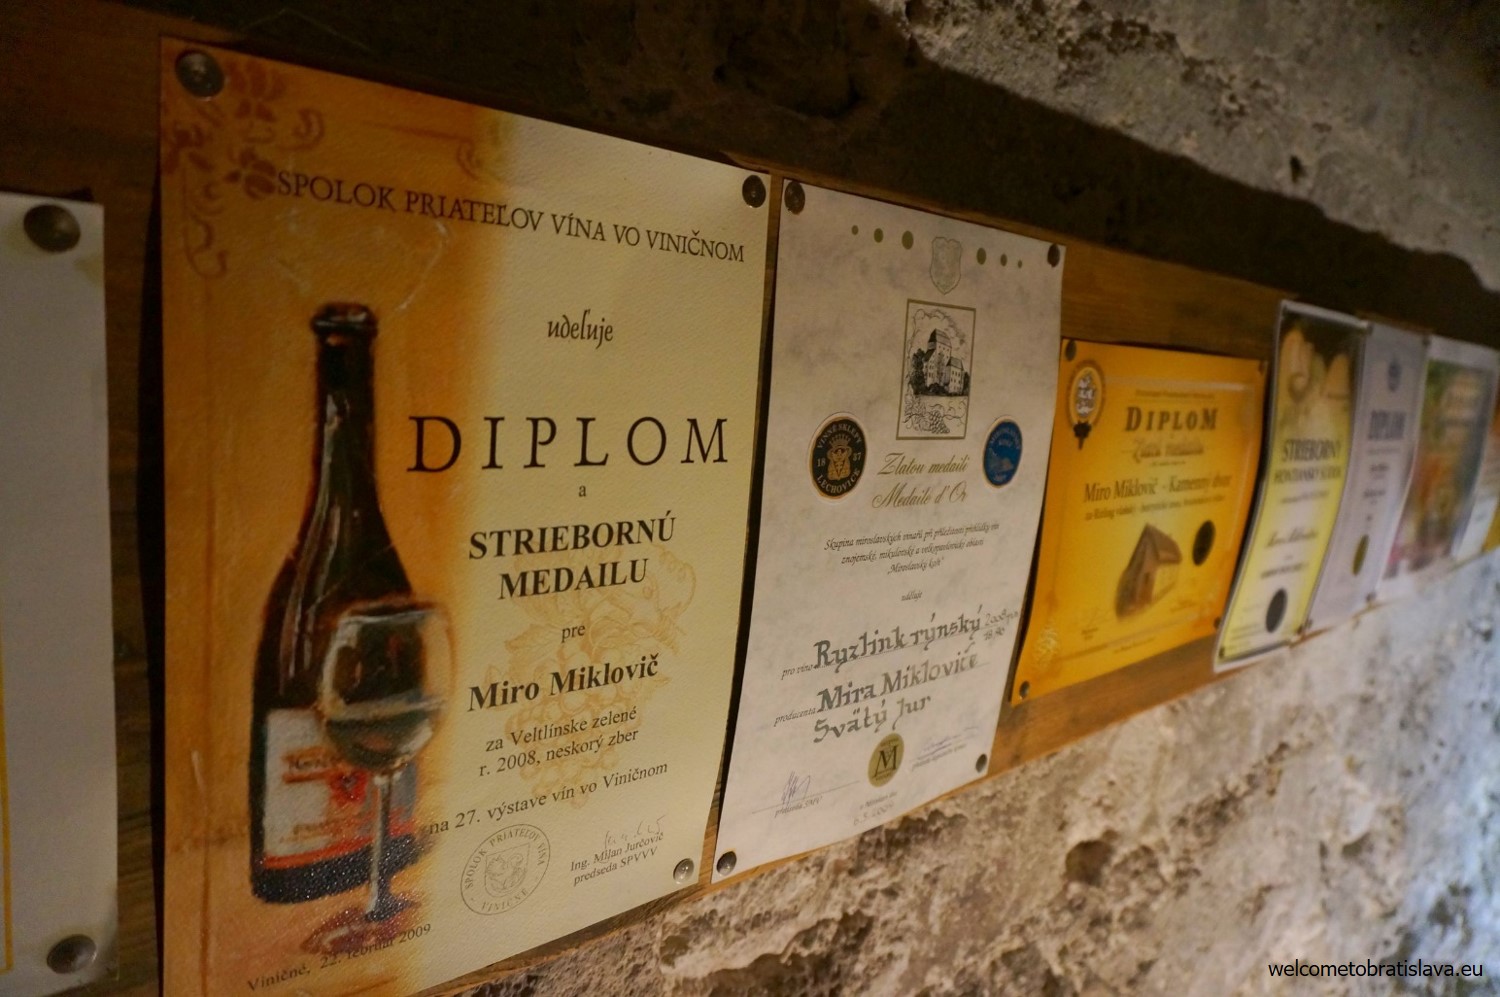 We also had a small tour at their wine cellar where the owers store their bottles as well all the certificates and diplomas they have so far received for their products – impressive!